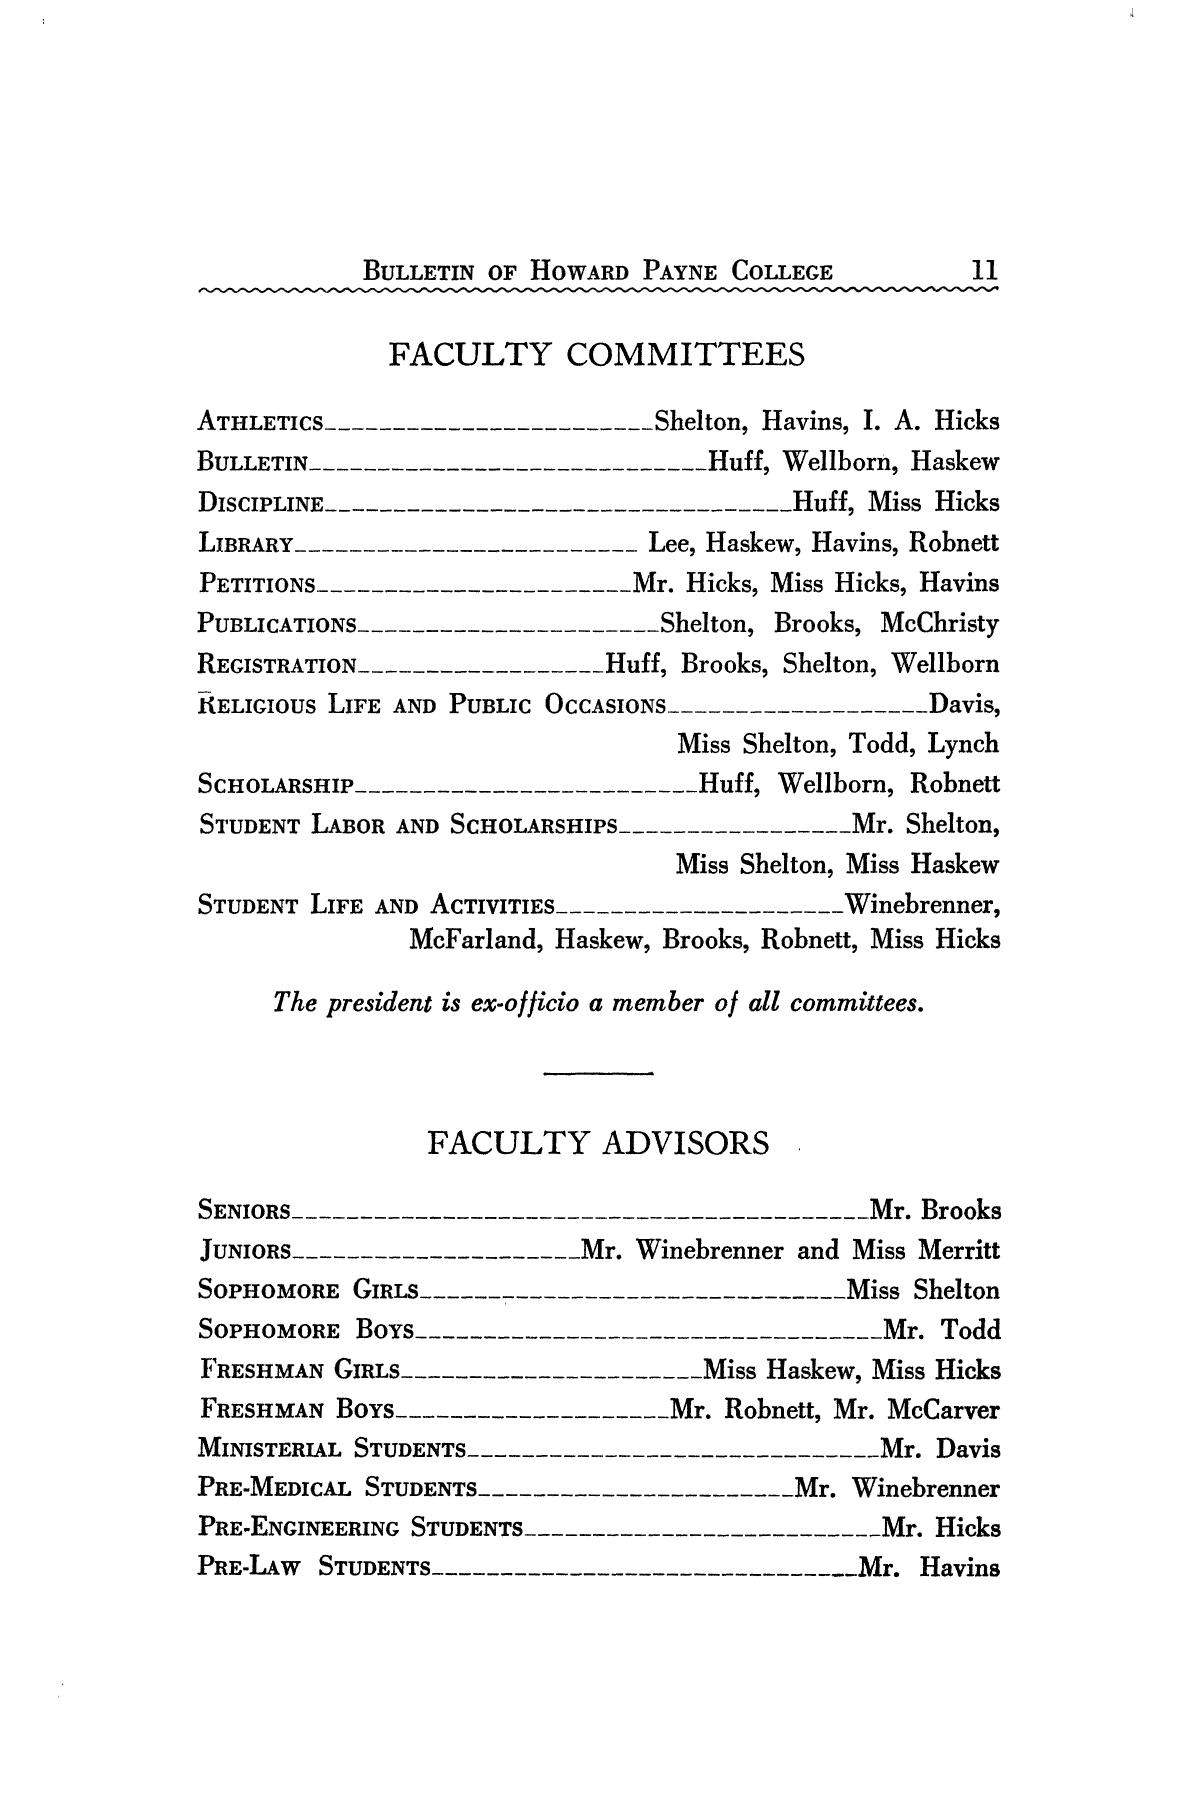 Catalogue of Howard Payne College, 1940-1941
                                                
                                                    11
                                                